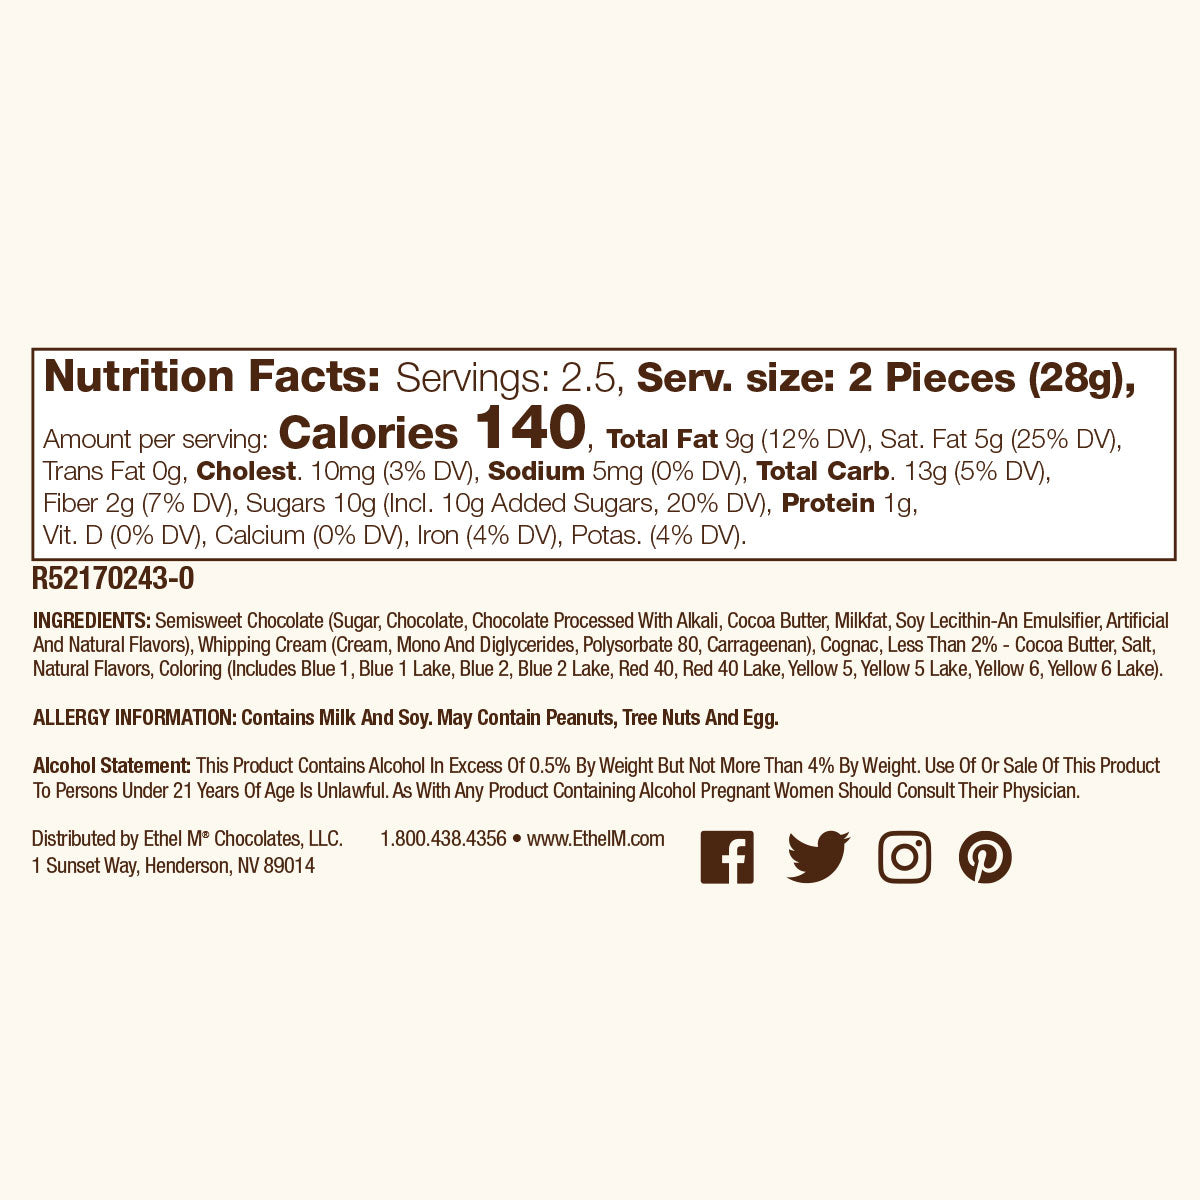 Nutrition Facts, Allergy and Ingredients on Ethel M Chocolates Vegas Golden Knights Official Hockey Puck.